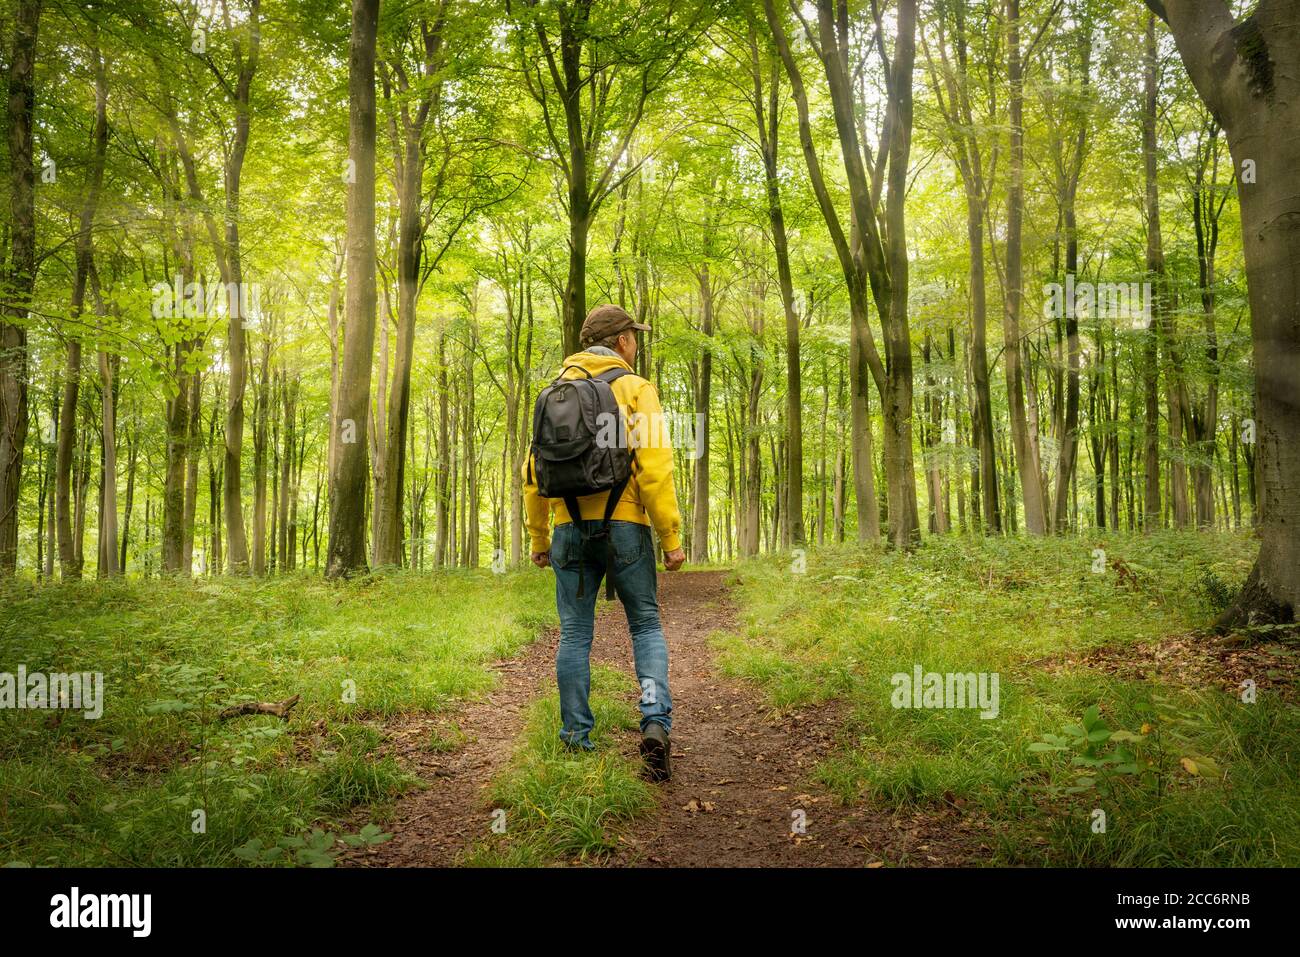 Male backpacker walking through a wooded forest, back view. Stock Photo